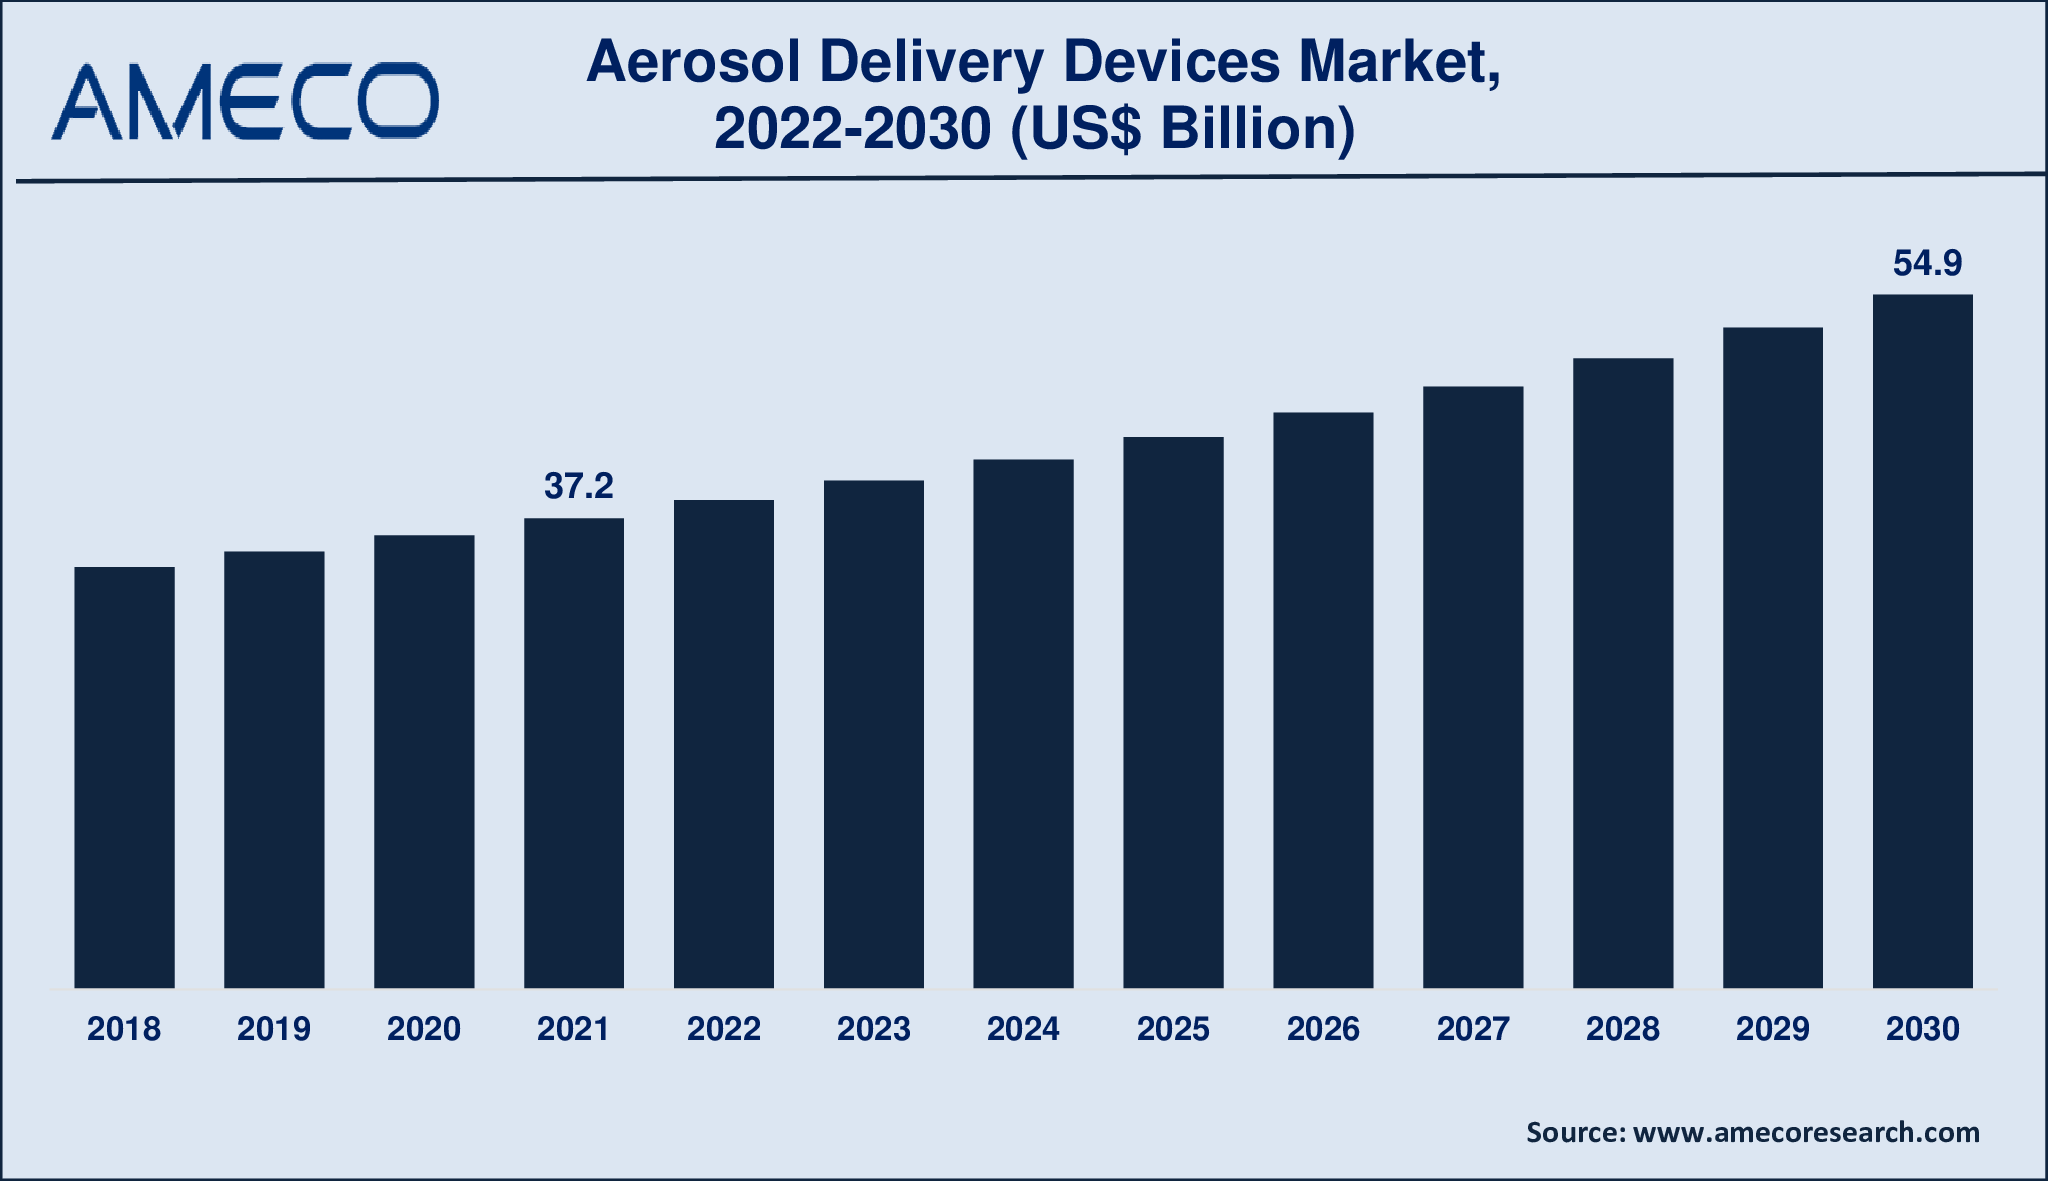 Aerosol Delivery Devices Market Size, Share, Growth, Trends, and Forecast 2022-2030